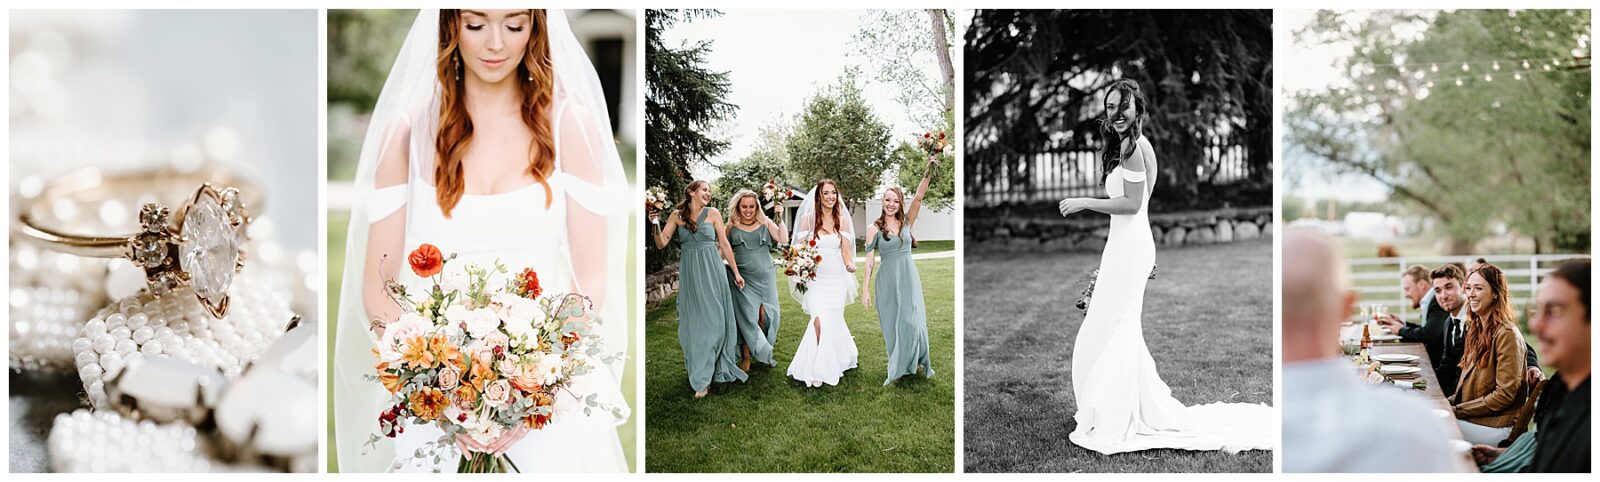 forst image on left is close up of bride and her bouquet followed by images showcasing details from her day. That includes her bridesmaids and imae of their outdoor reception